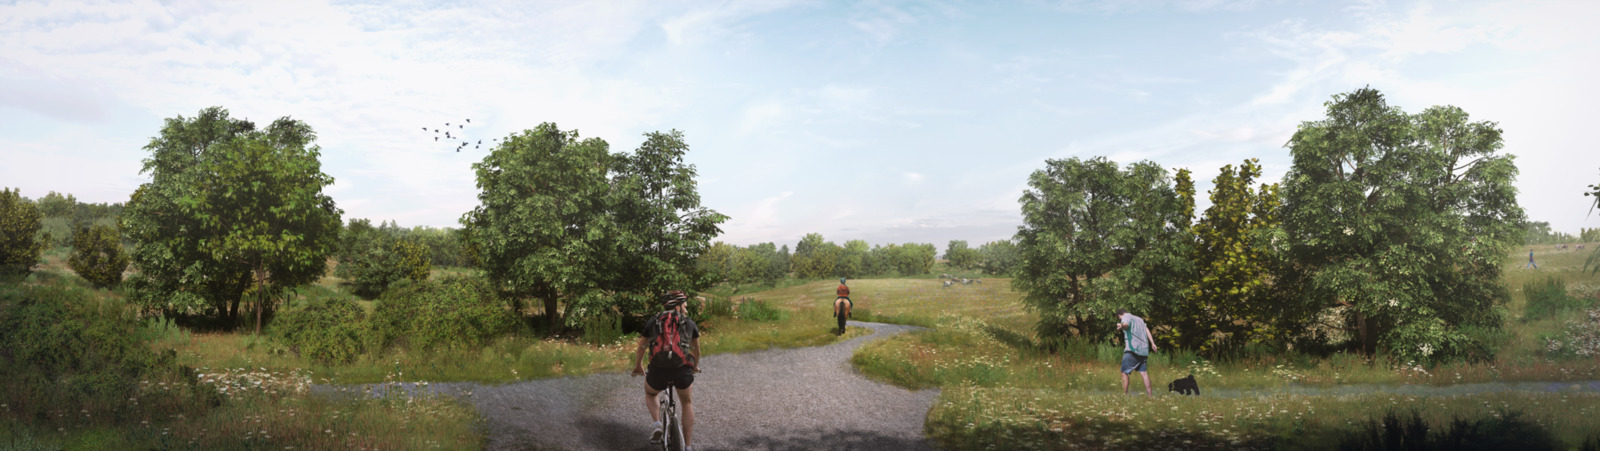 New walking and cycling routes are proposed within the Colne Valley. Credit: HS2